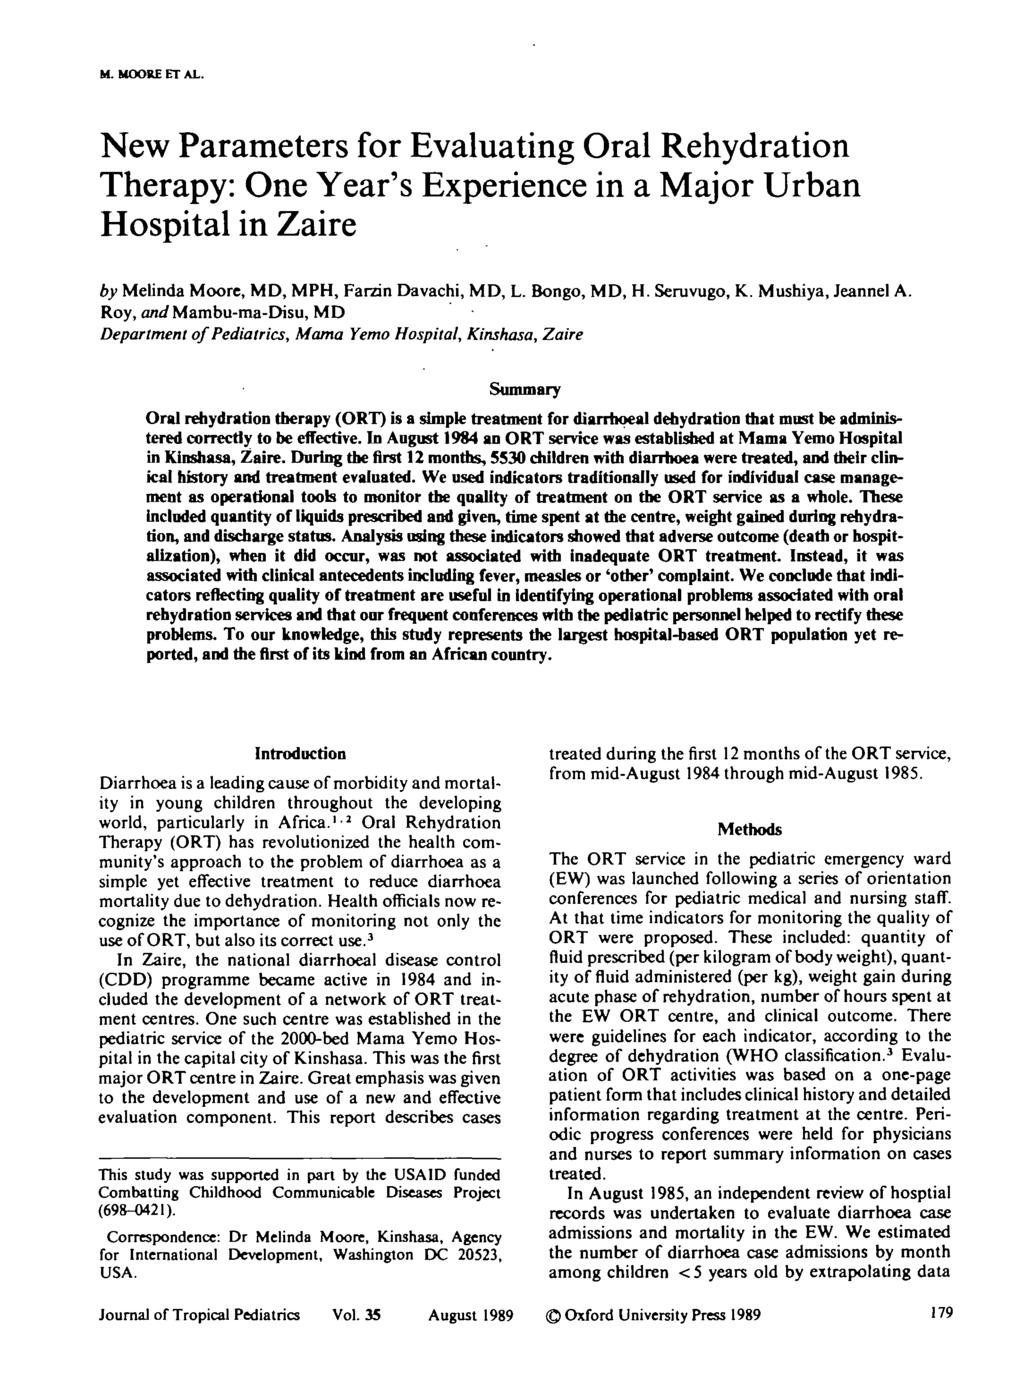 M. MOORE ETAL. New Parameters fr Evaluating Oral Rehydratin Therapy: One Year's Experience in a Majr Urban Hspital in Zaire by Melinda Mre, MD, MPH, Farzin Davachi, MD, L. Bng, MD, H. Seruvug, K.